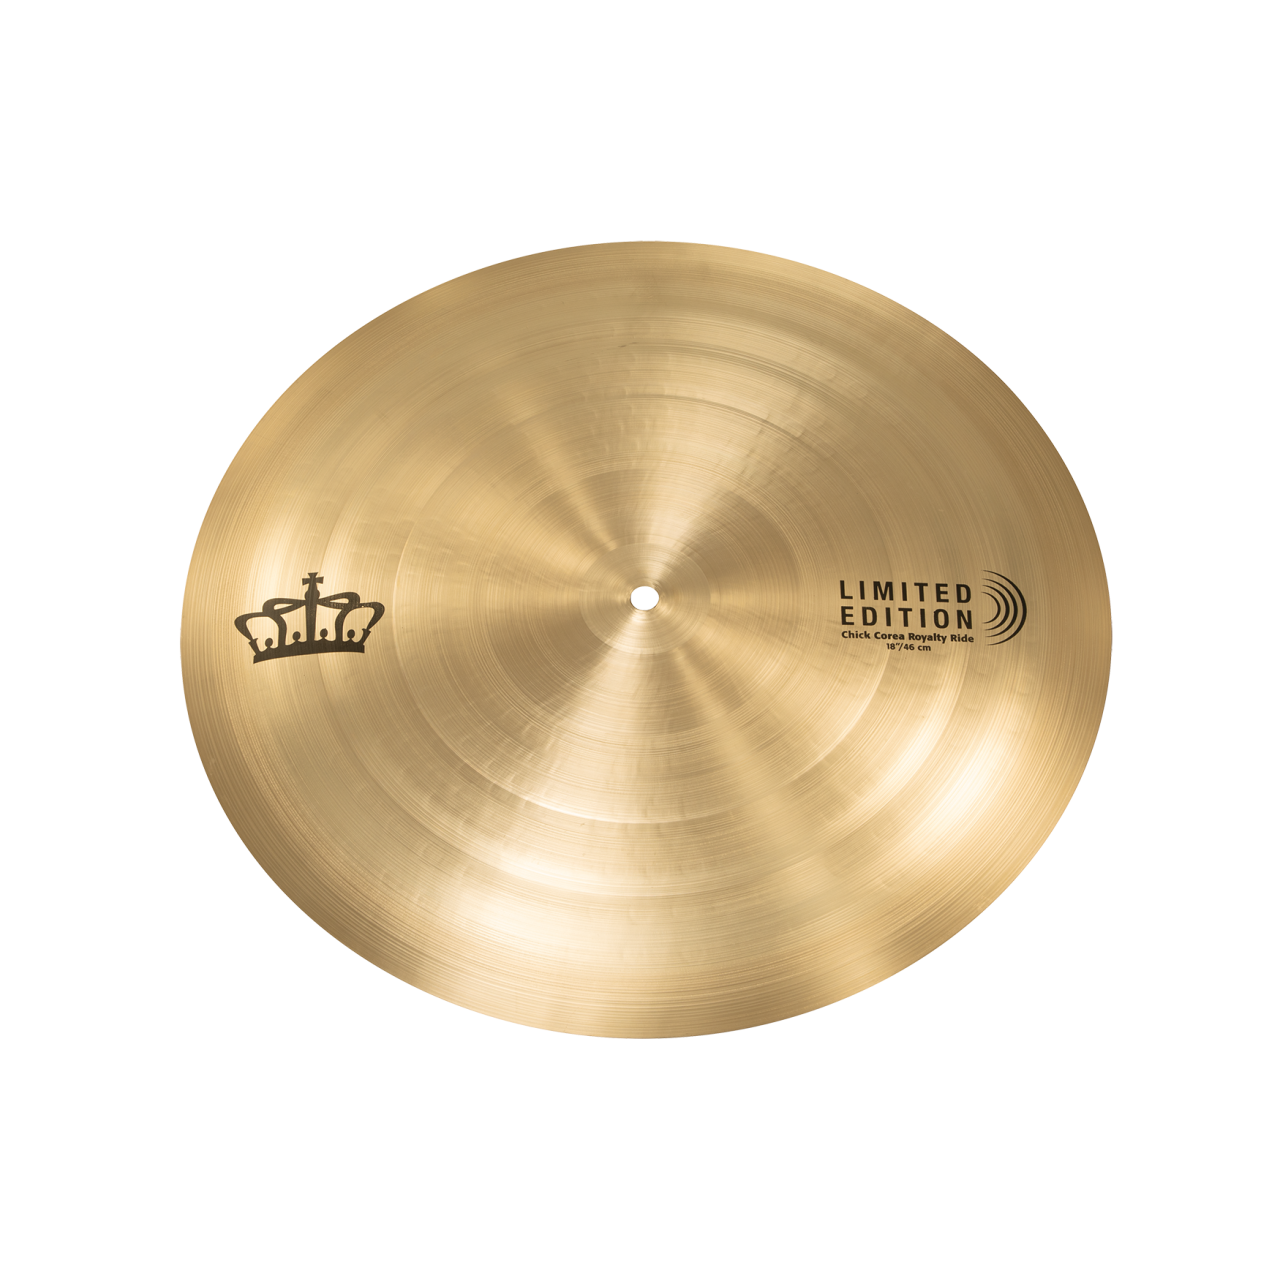 Sabian 18" AAX Chick Corea Royalty Ride Limited Edition